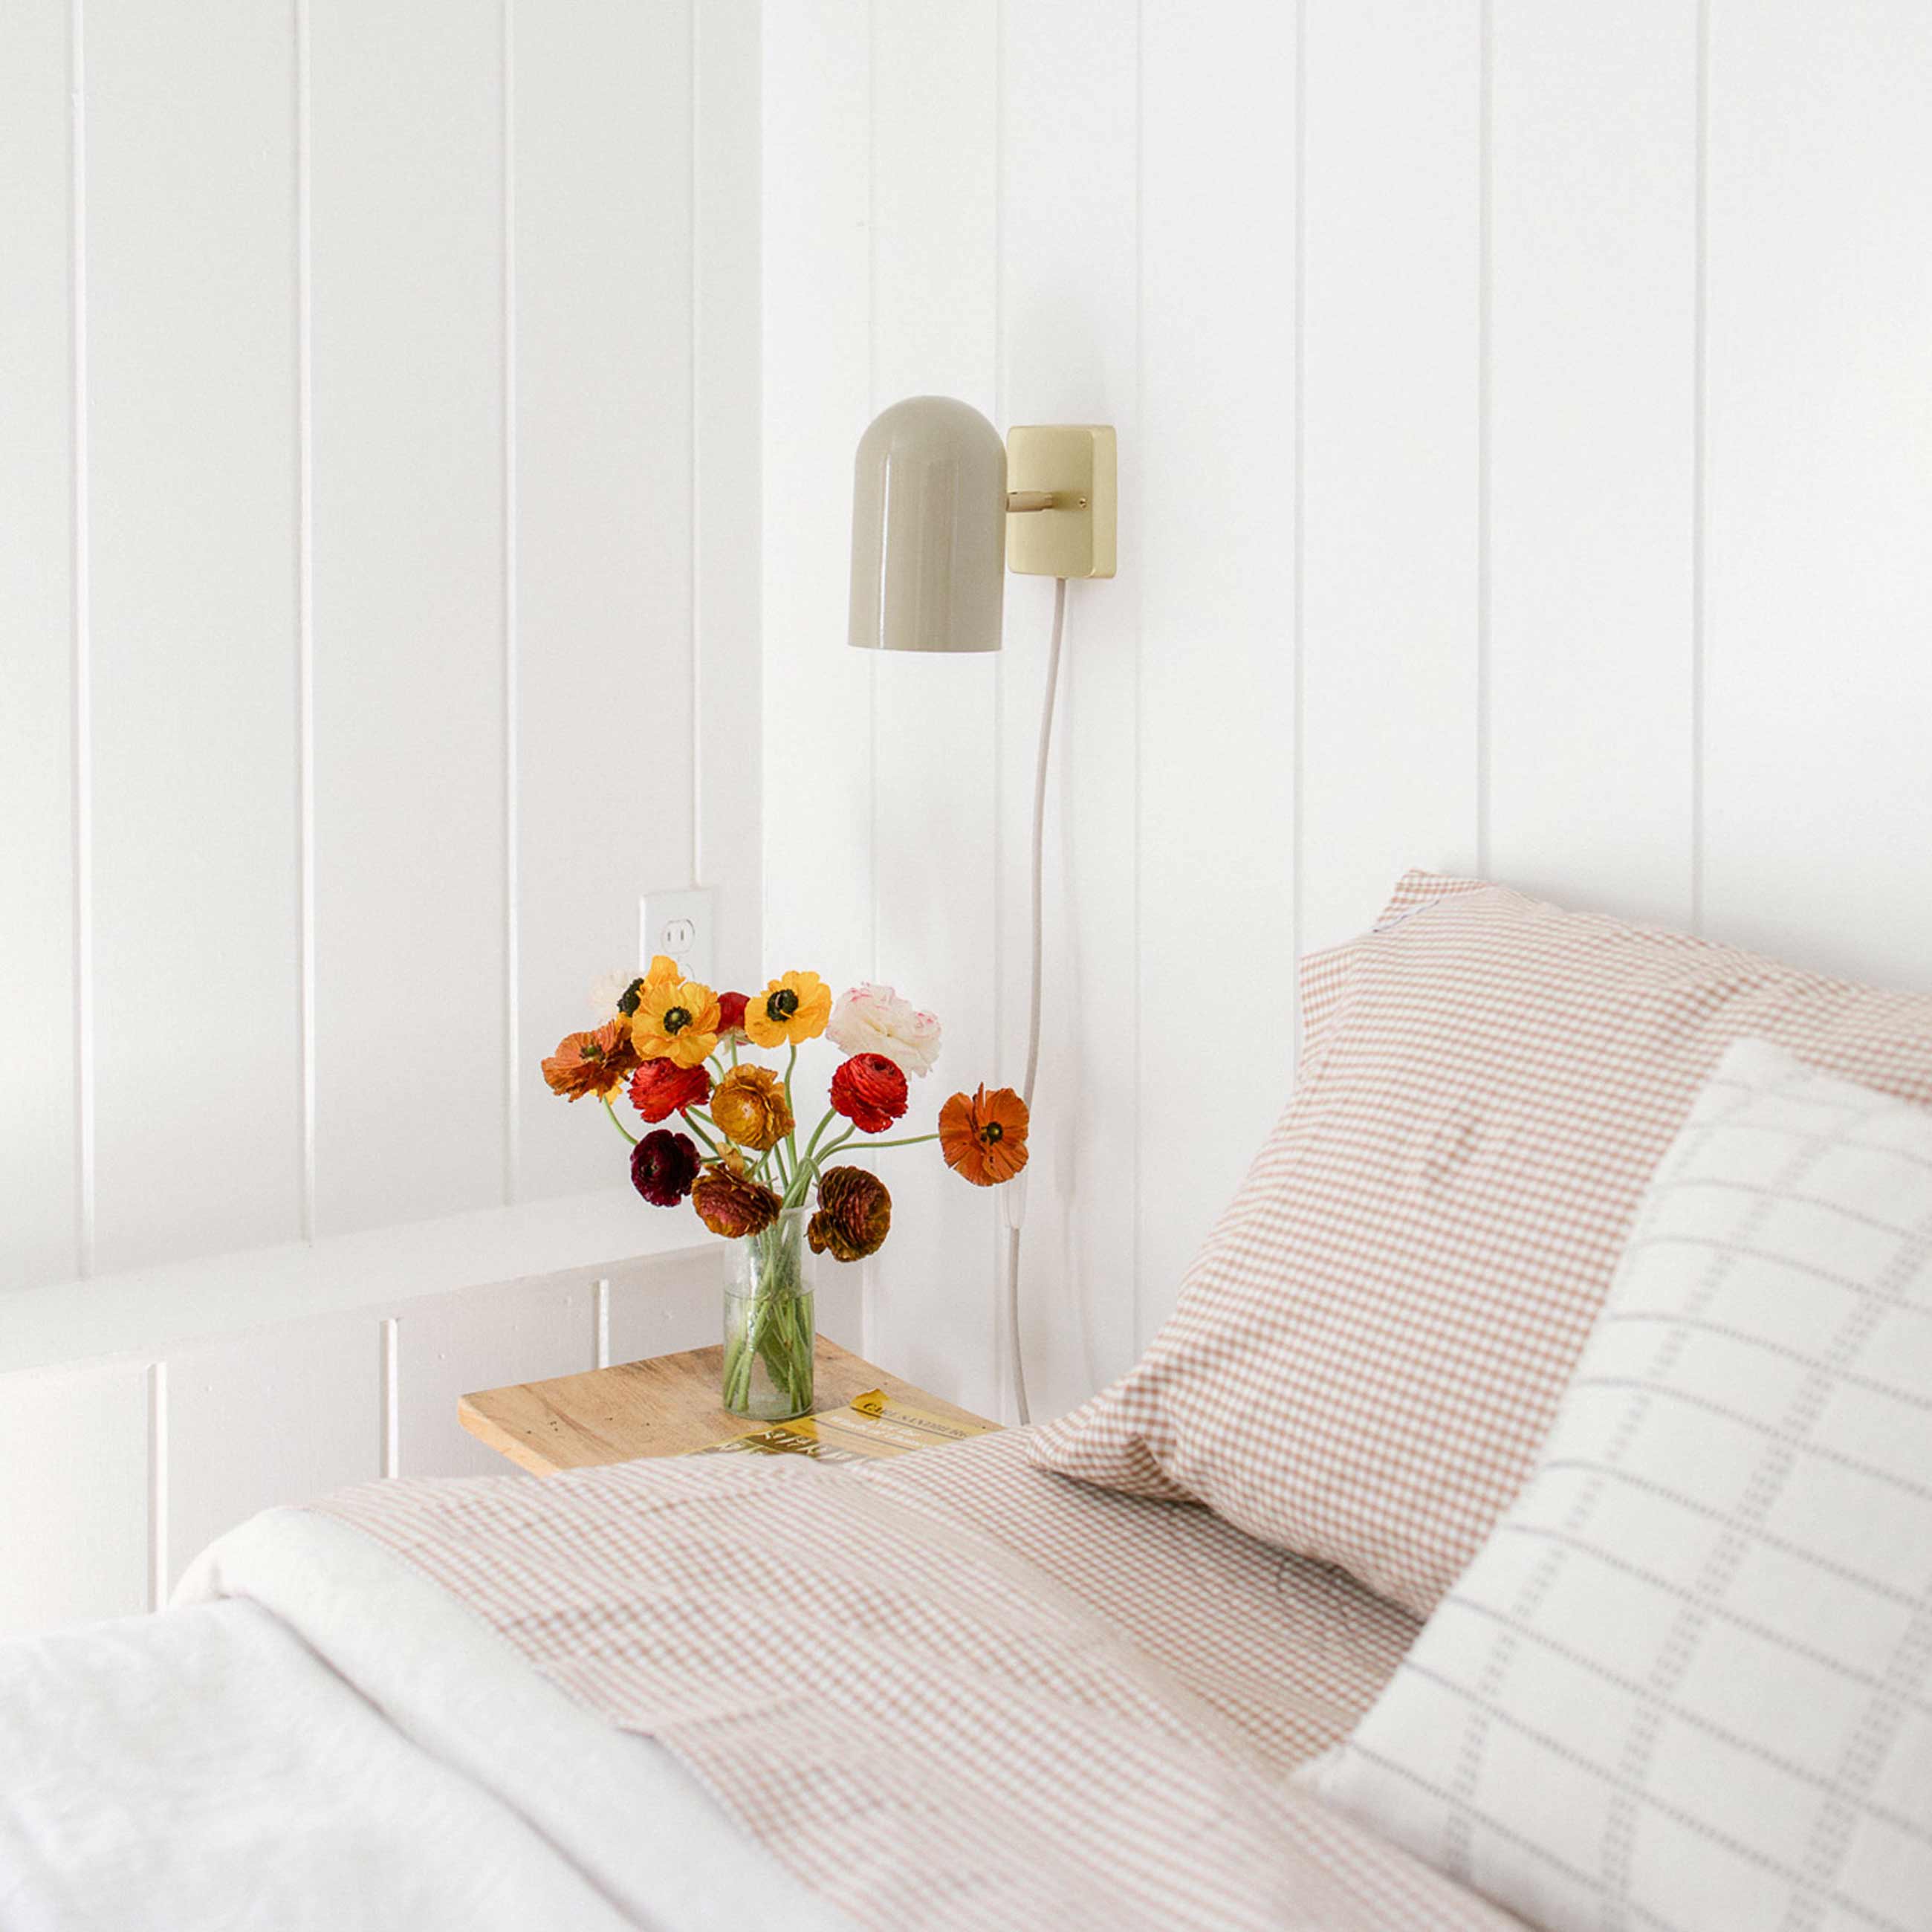 Plug-in wall sconce above nightstand next to bed in bright and airy bedroom.